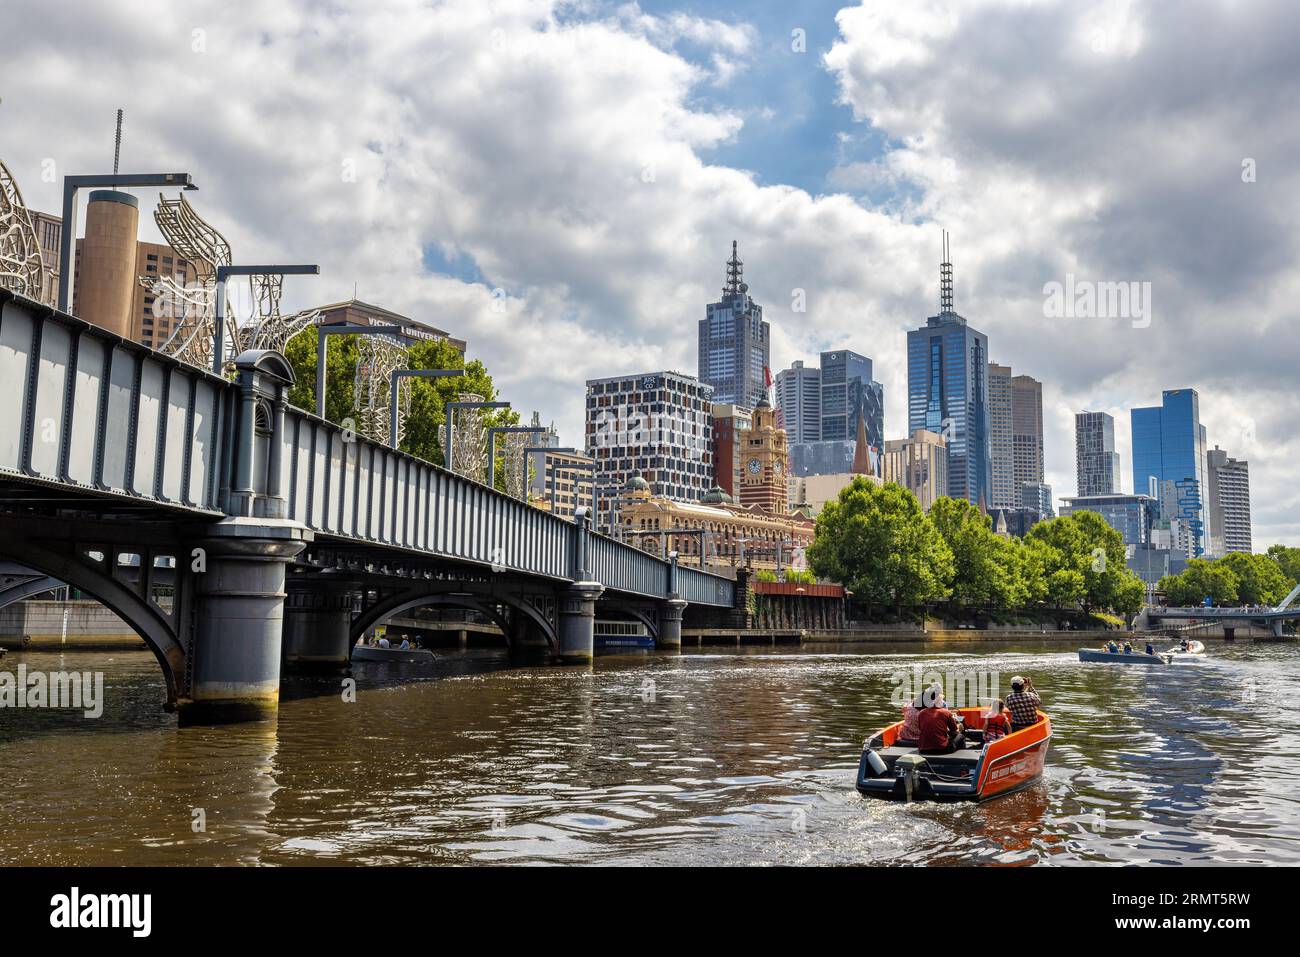 Melbourne, Australia - 22 Jan 2023: Bridge across the Yarra River, with people out on pleasure boat rides, and the modern city buildings beyond. Stock Photo